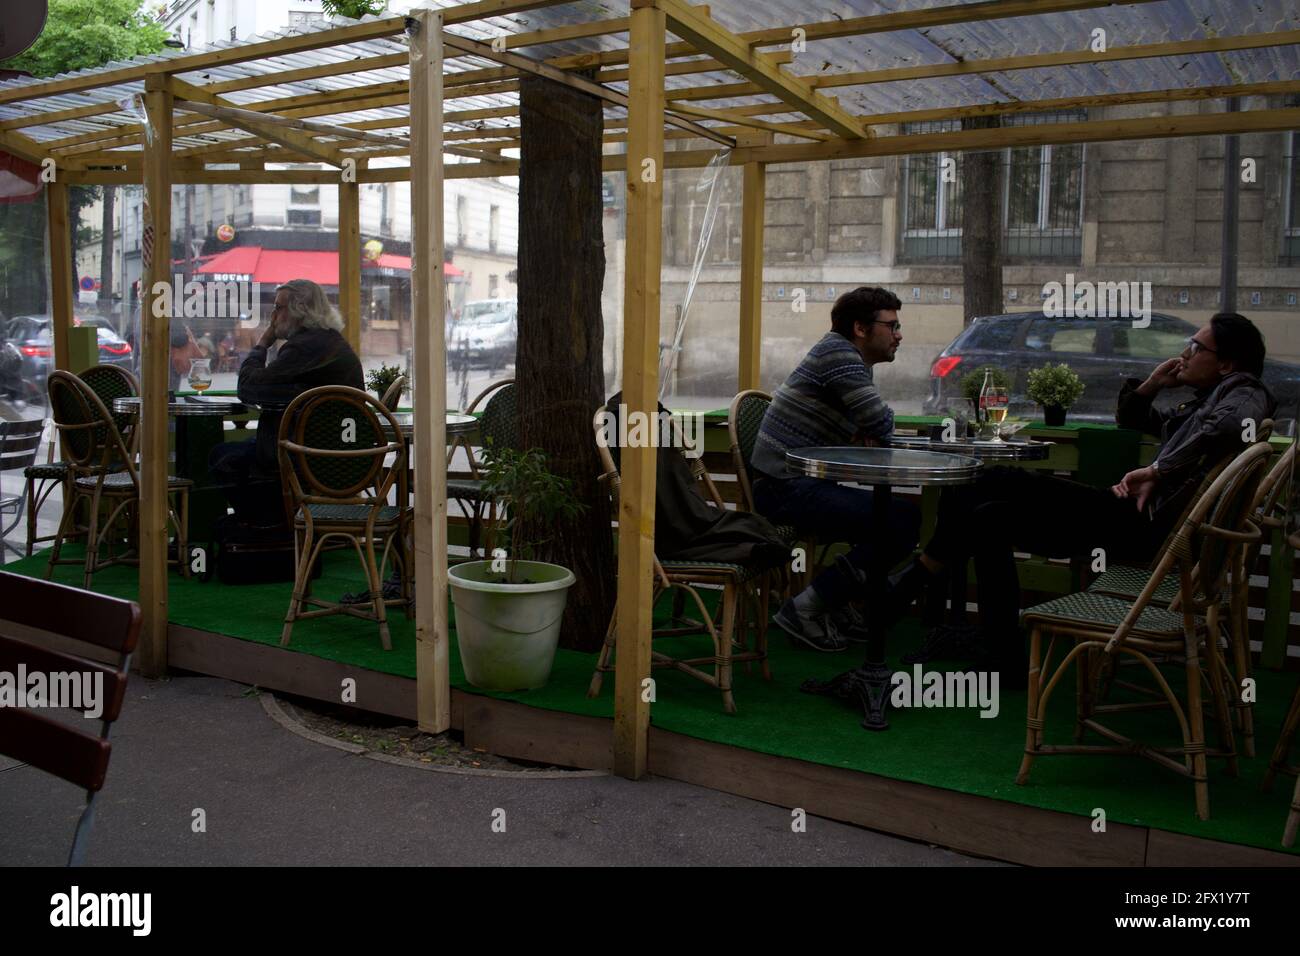 Parisians enjoy sitting at a temporary cafe terrace, built to enable customers to drink outside after Covid-19 restrictions were lifted in Paris in May 2021 - Le Montmartre Café, Rue Custine, 75018, Paris, France Stock Photo